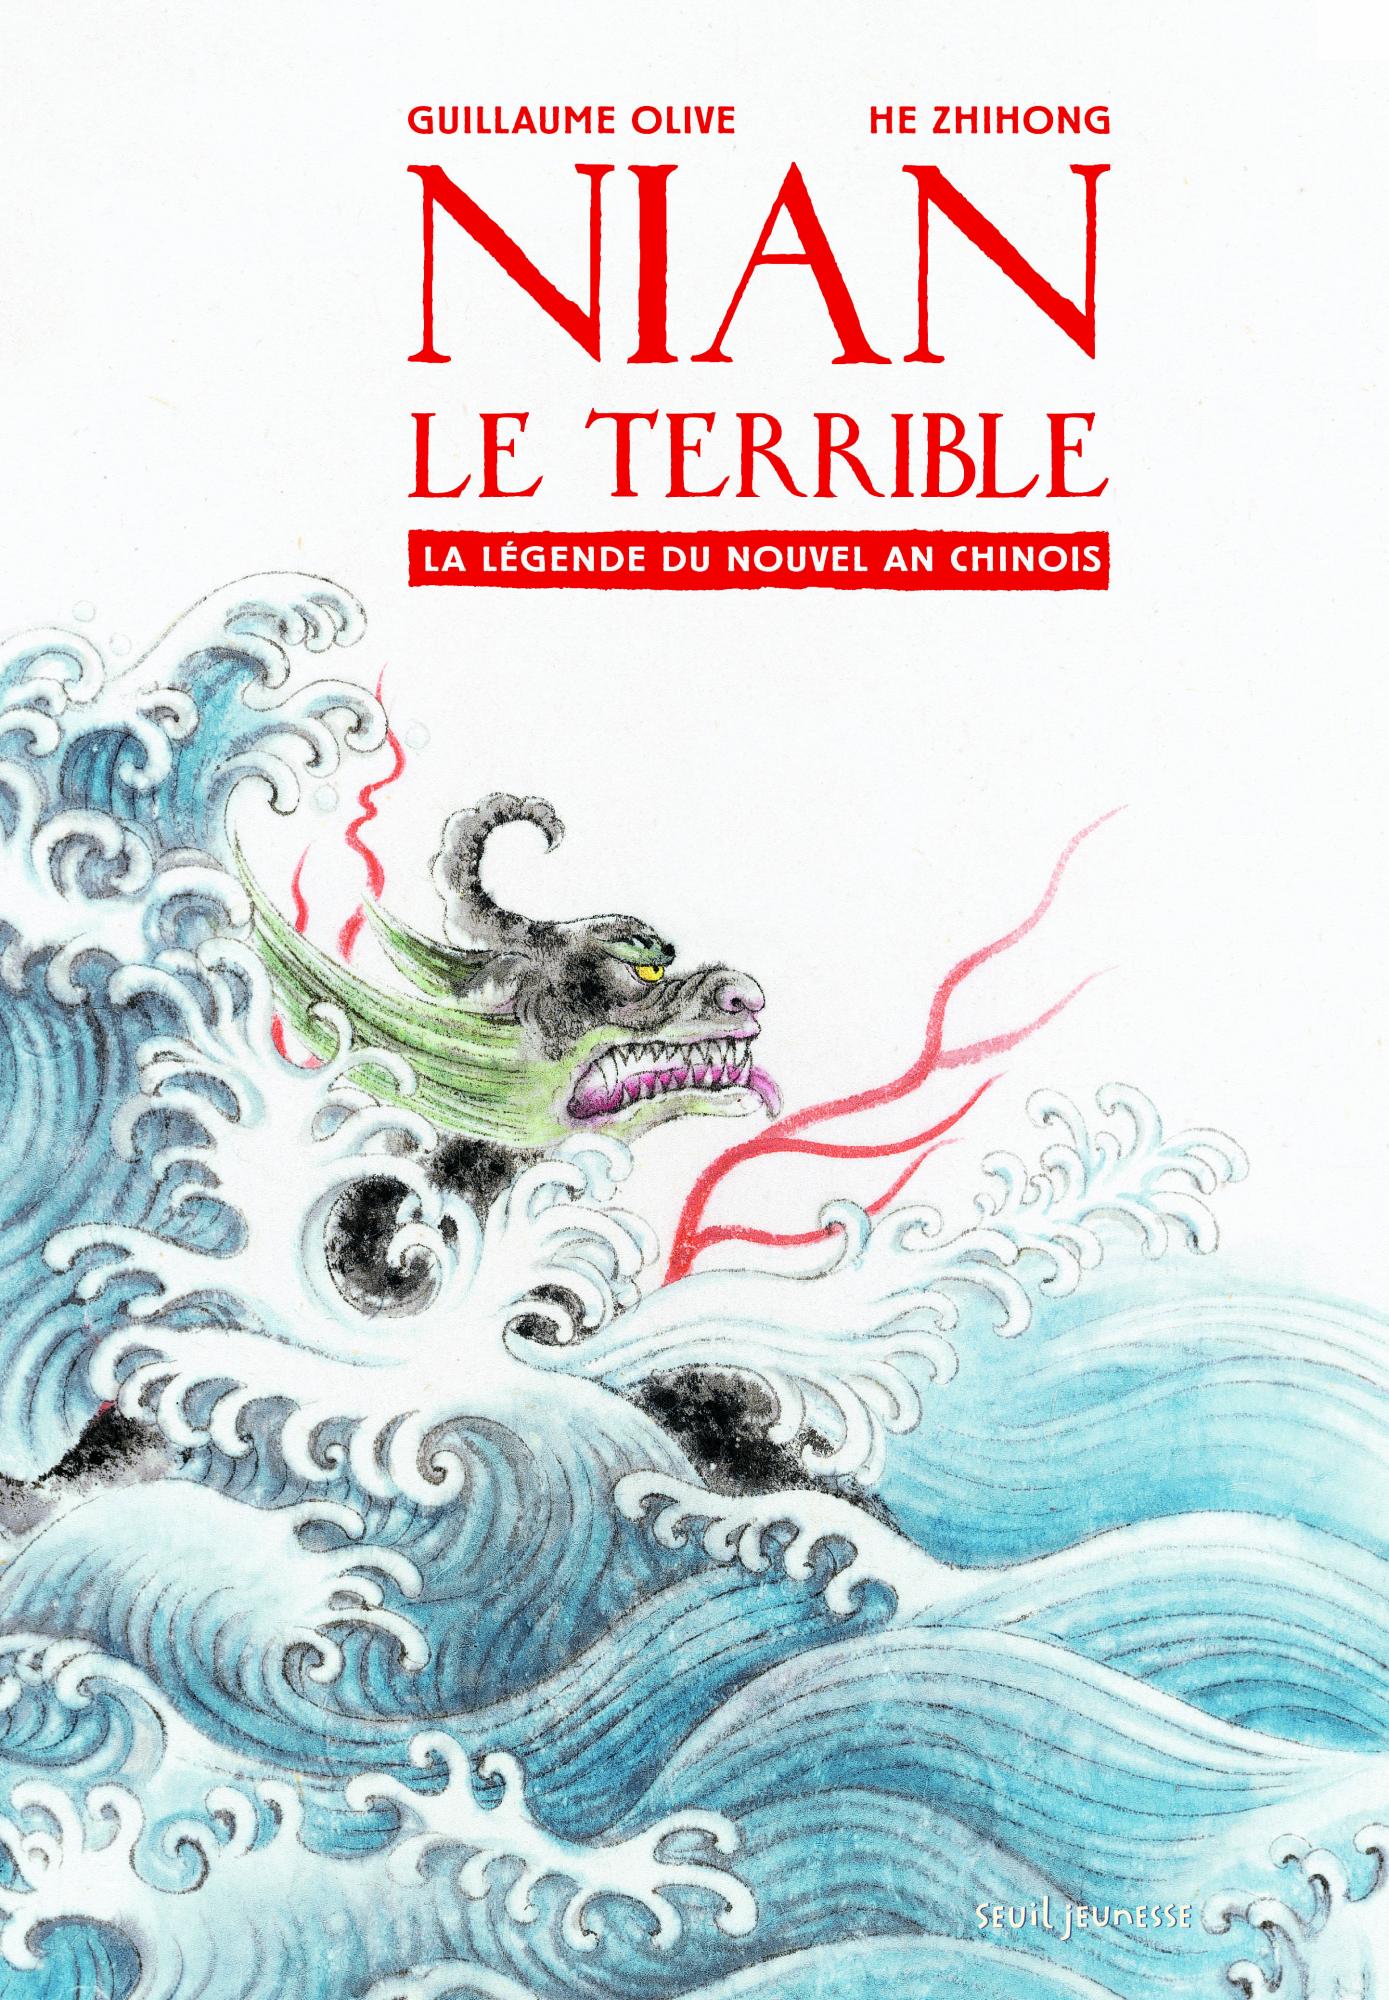 nian-le-terrible-guillaume-olive-he-zhihong